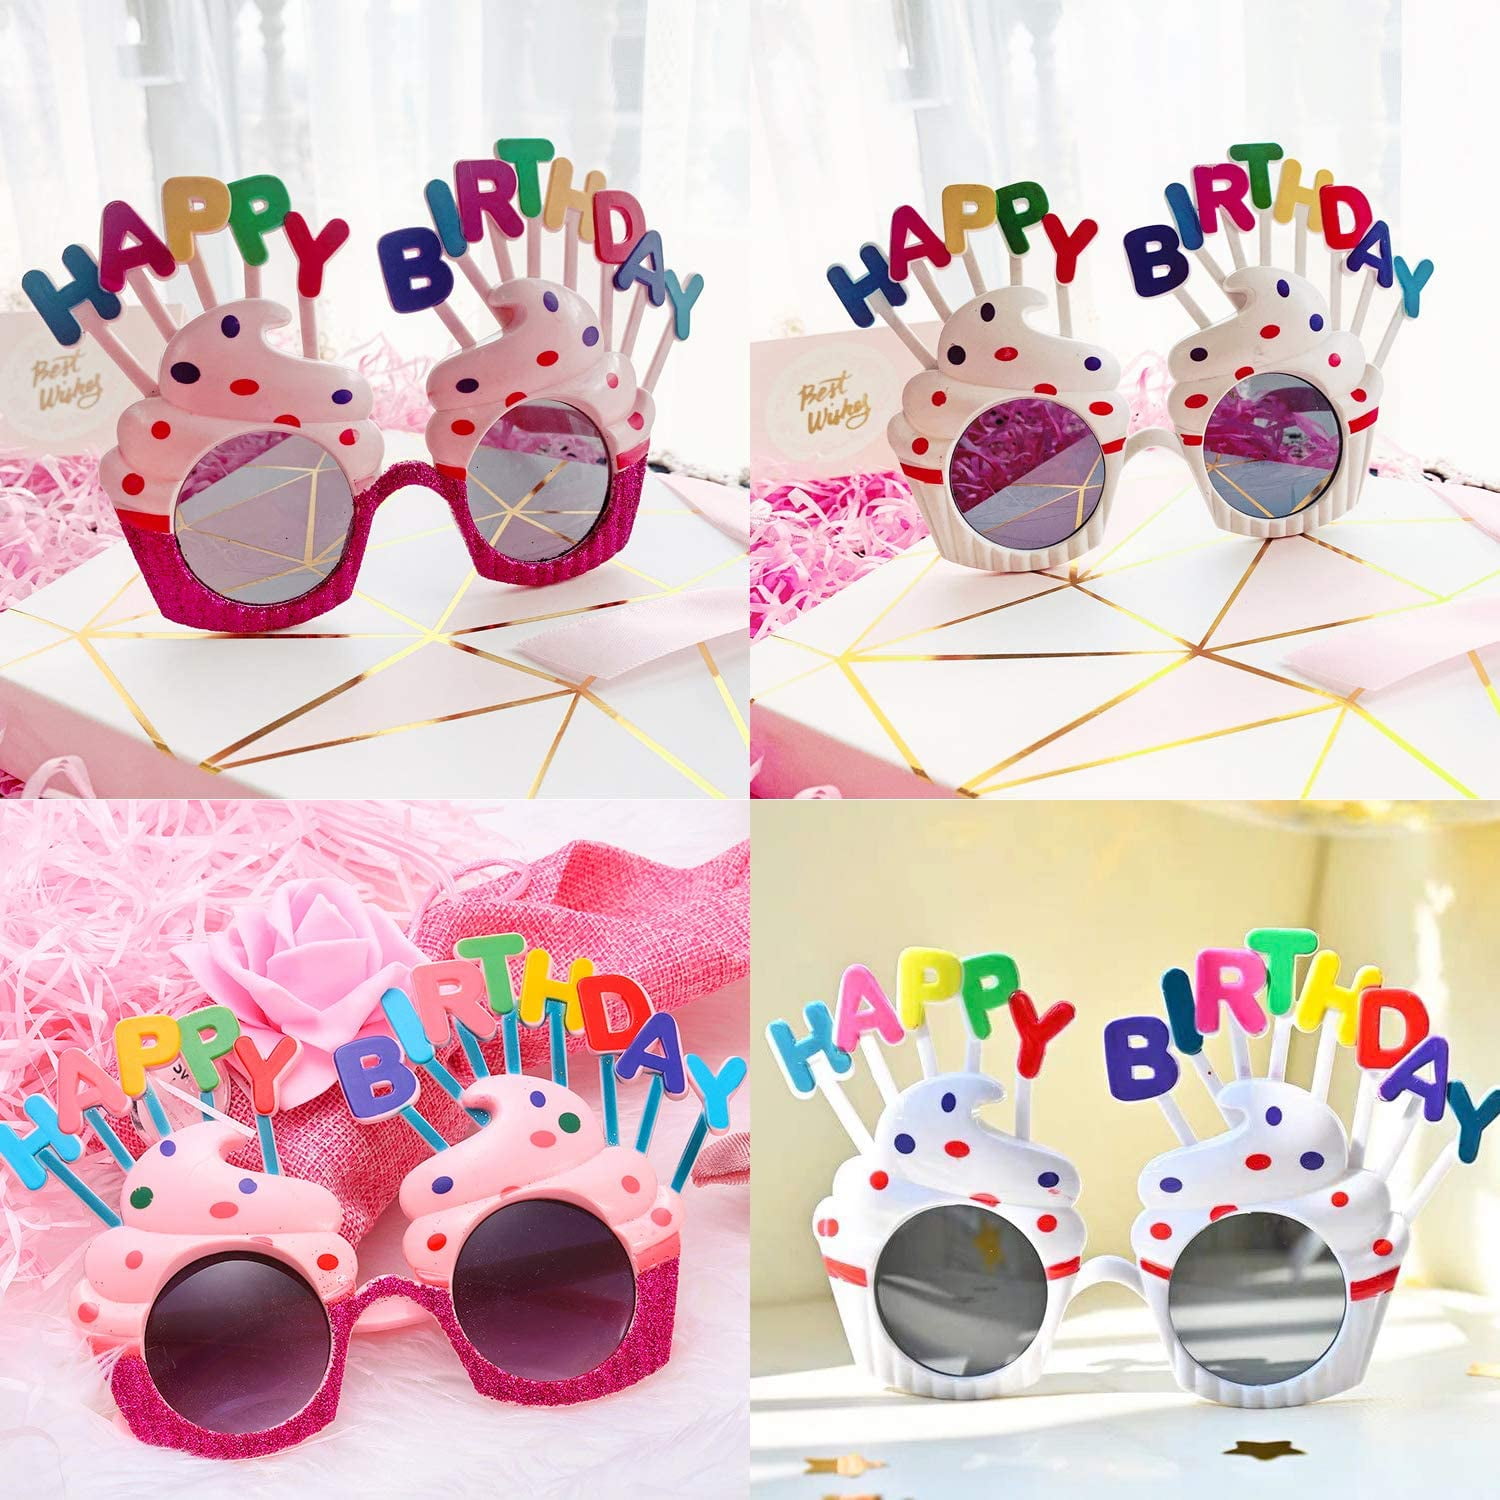 PINK 80TH BIRTHDAY AGE GLITTERED FOIL SPECTACLES PARTY GLASSES 